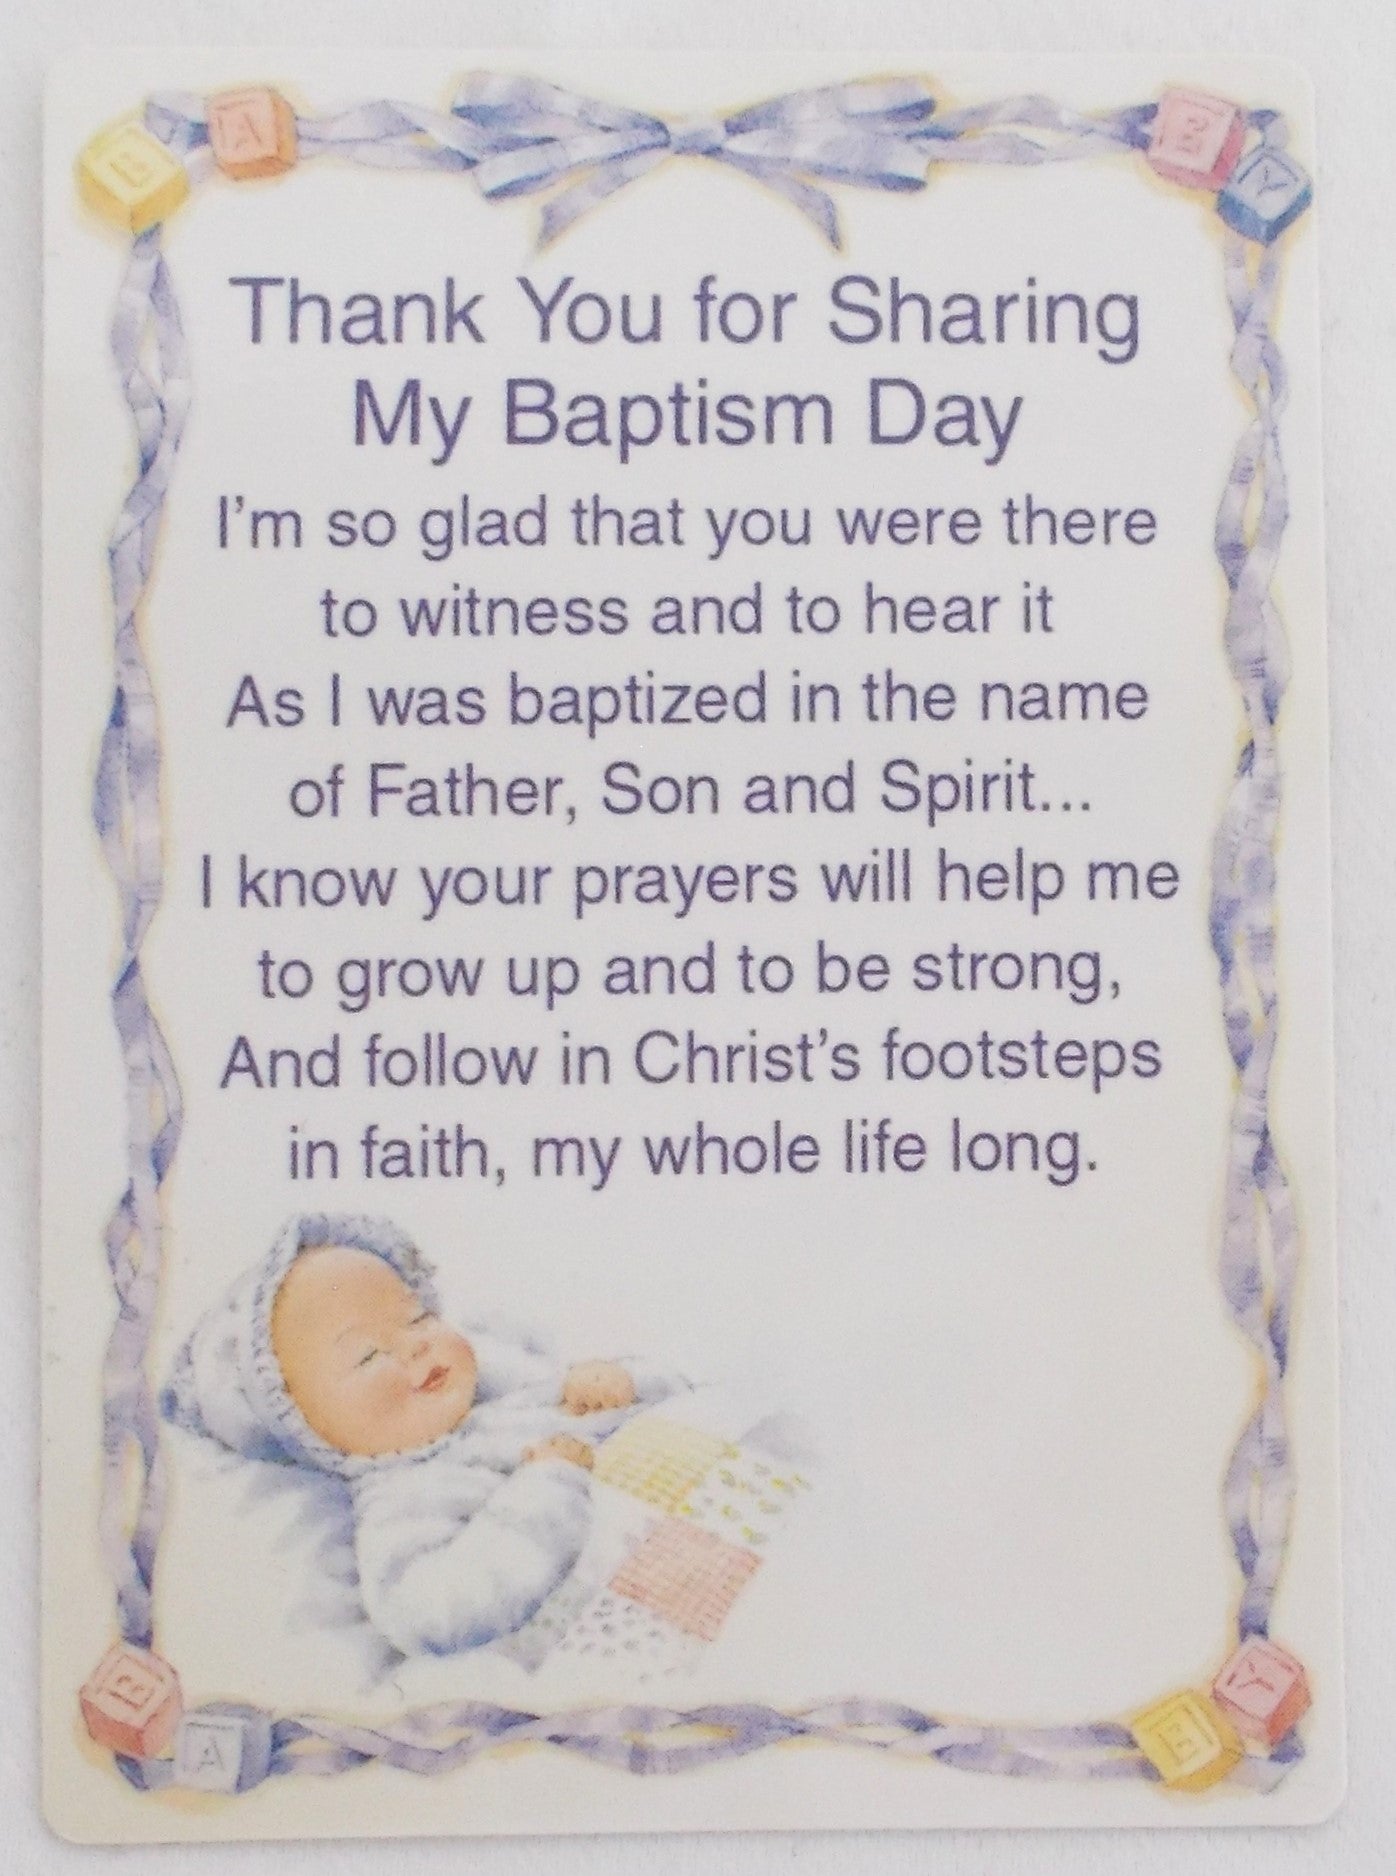 Thank You for Sharing My Baptism Day - Pocket Card